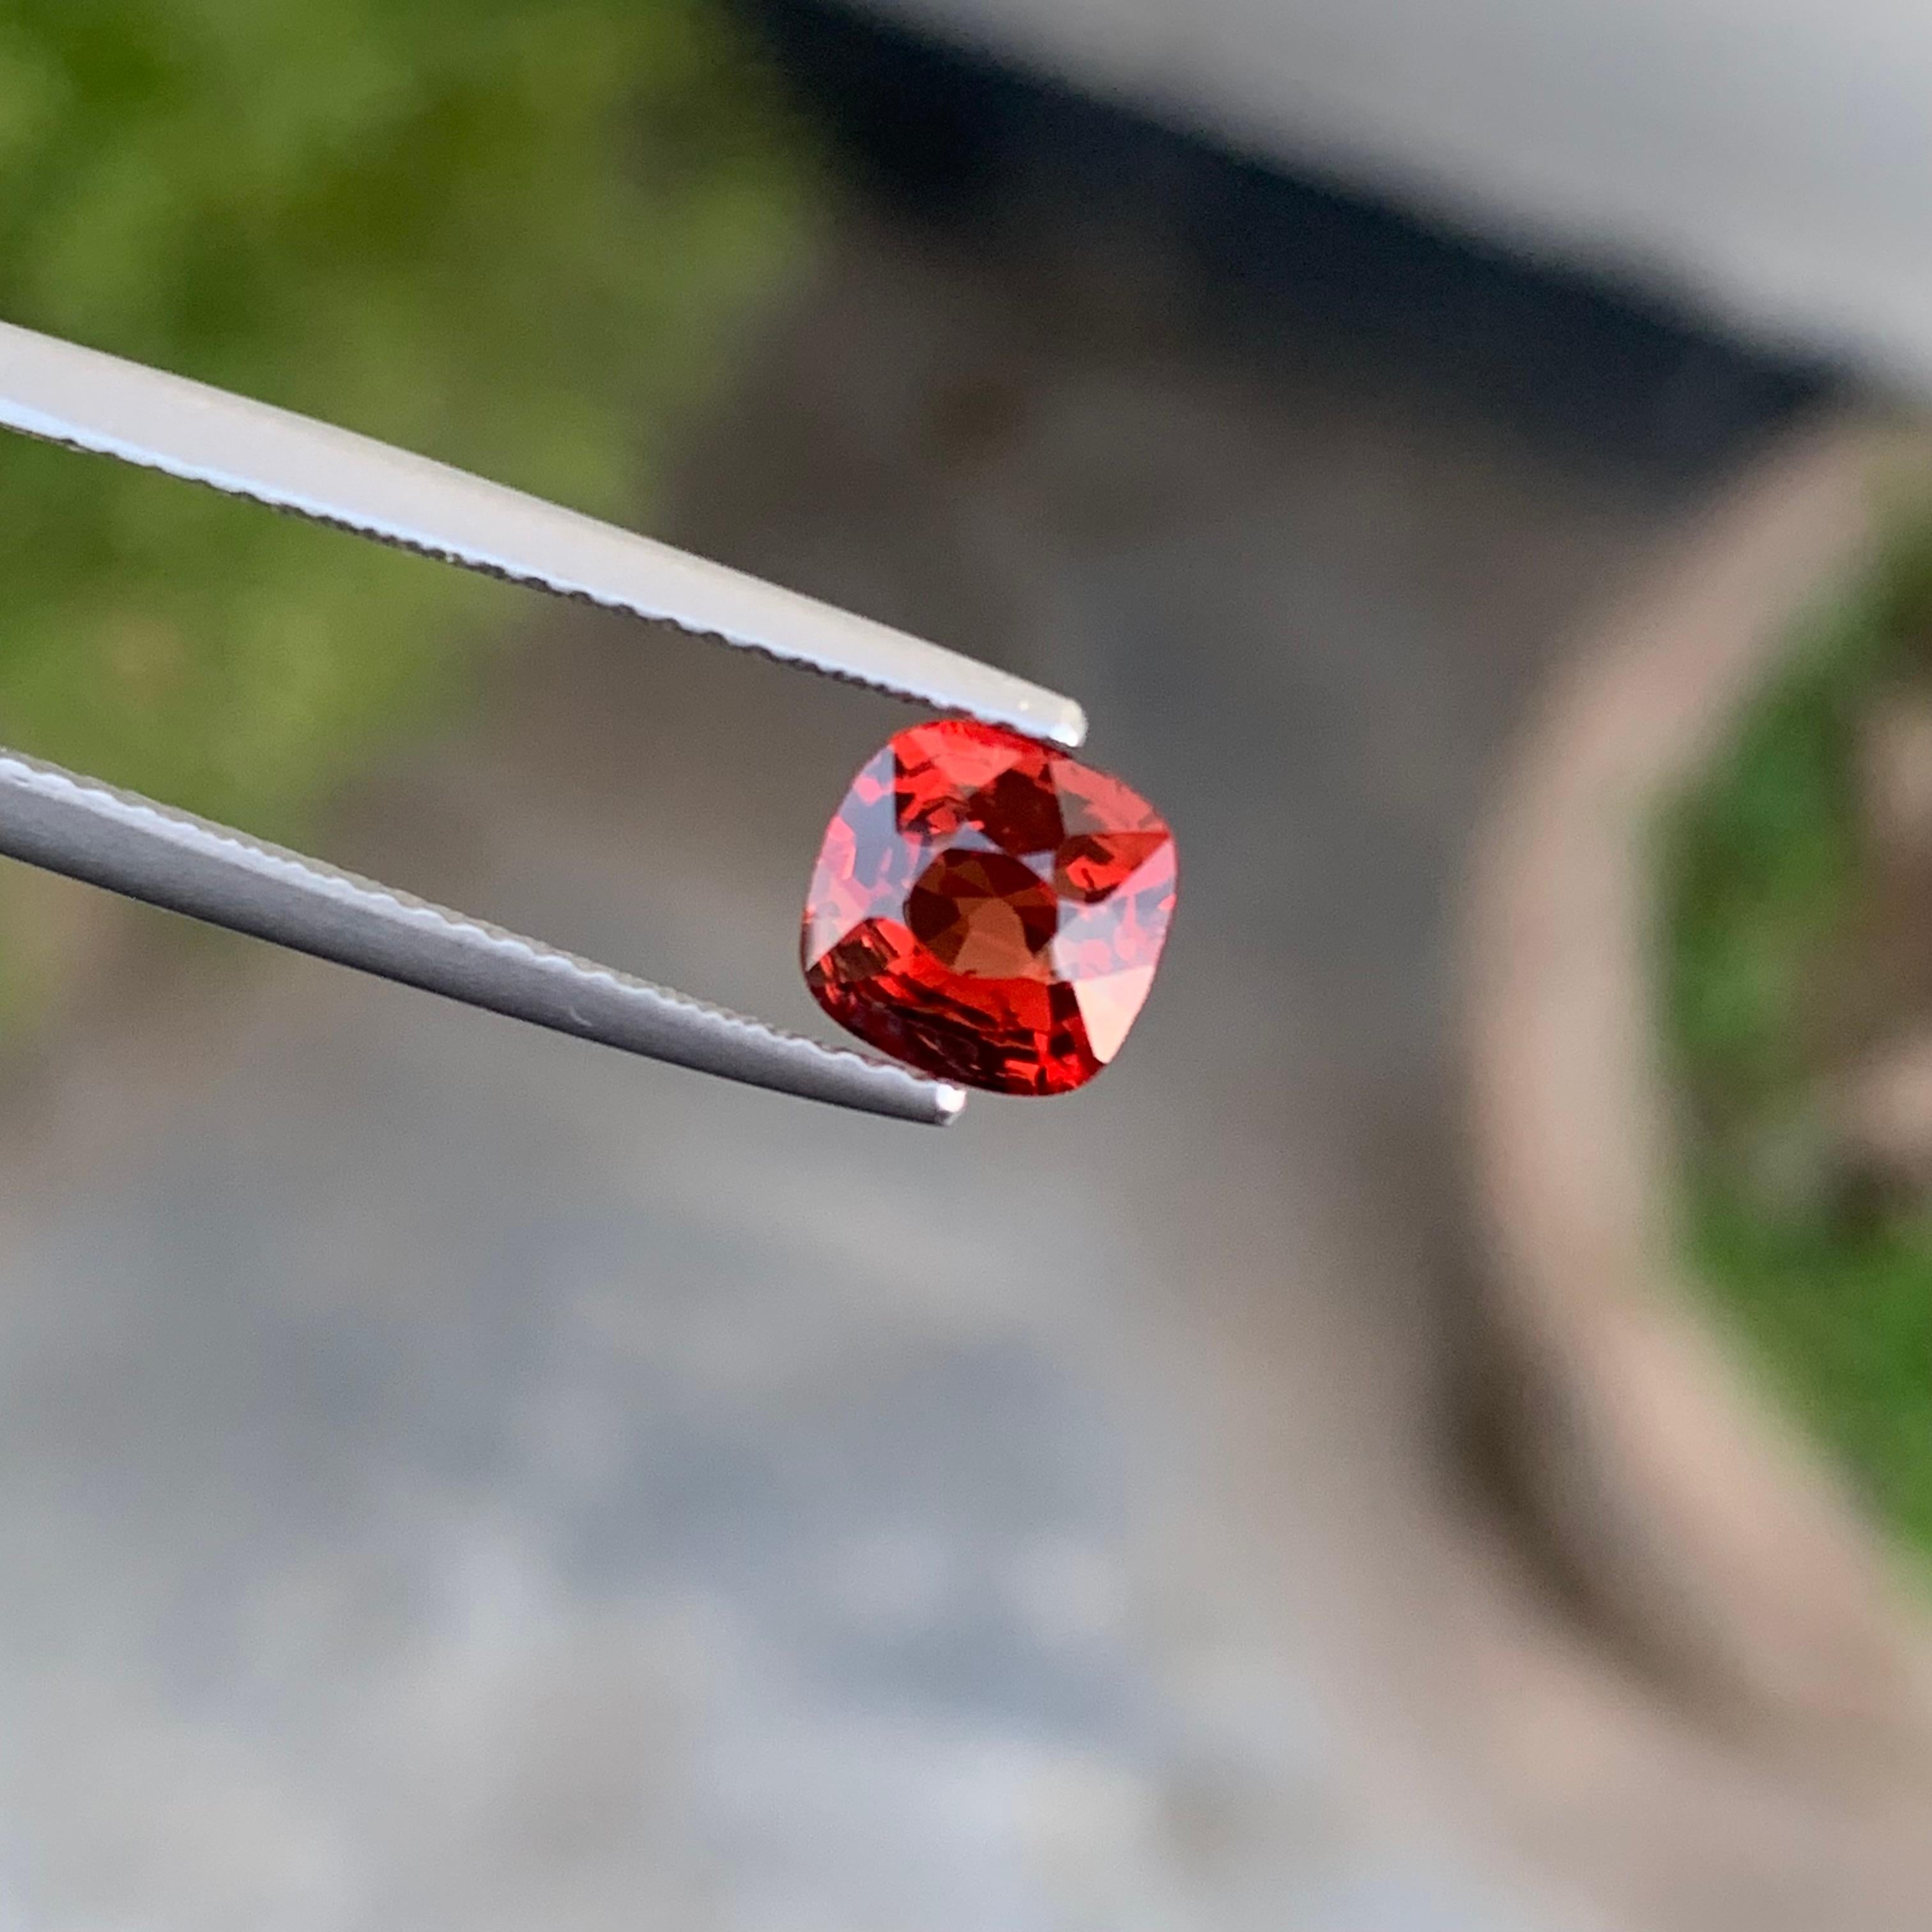 Charming 1.25 Carat Cushion Cut Loose Natural Red Spinel from Burma Myanmar For Sale 1